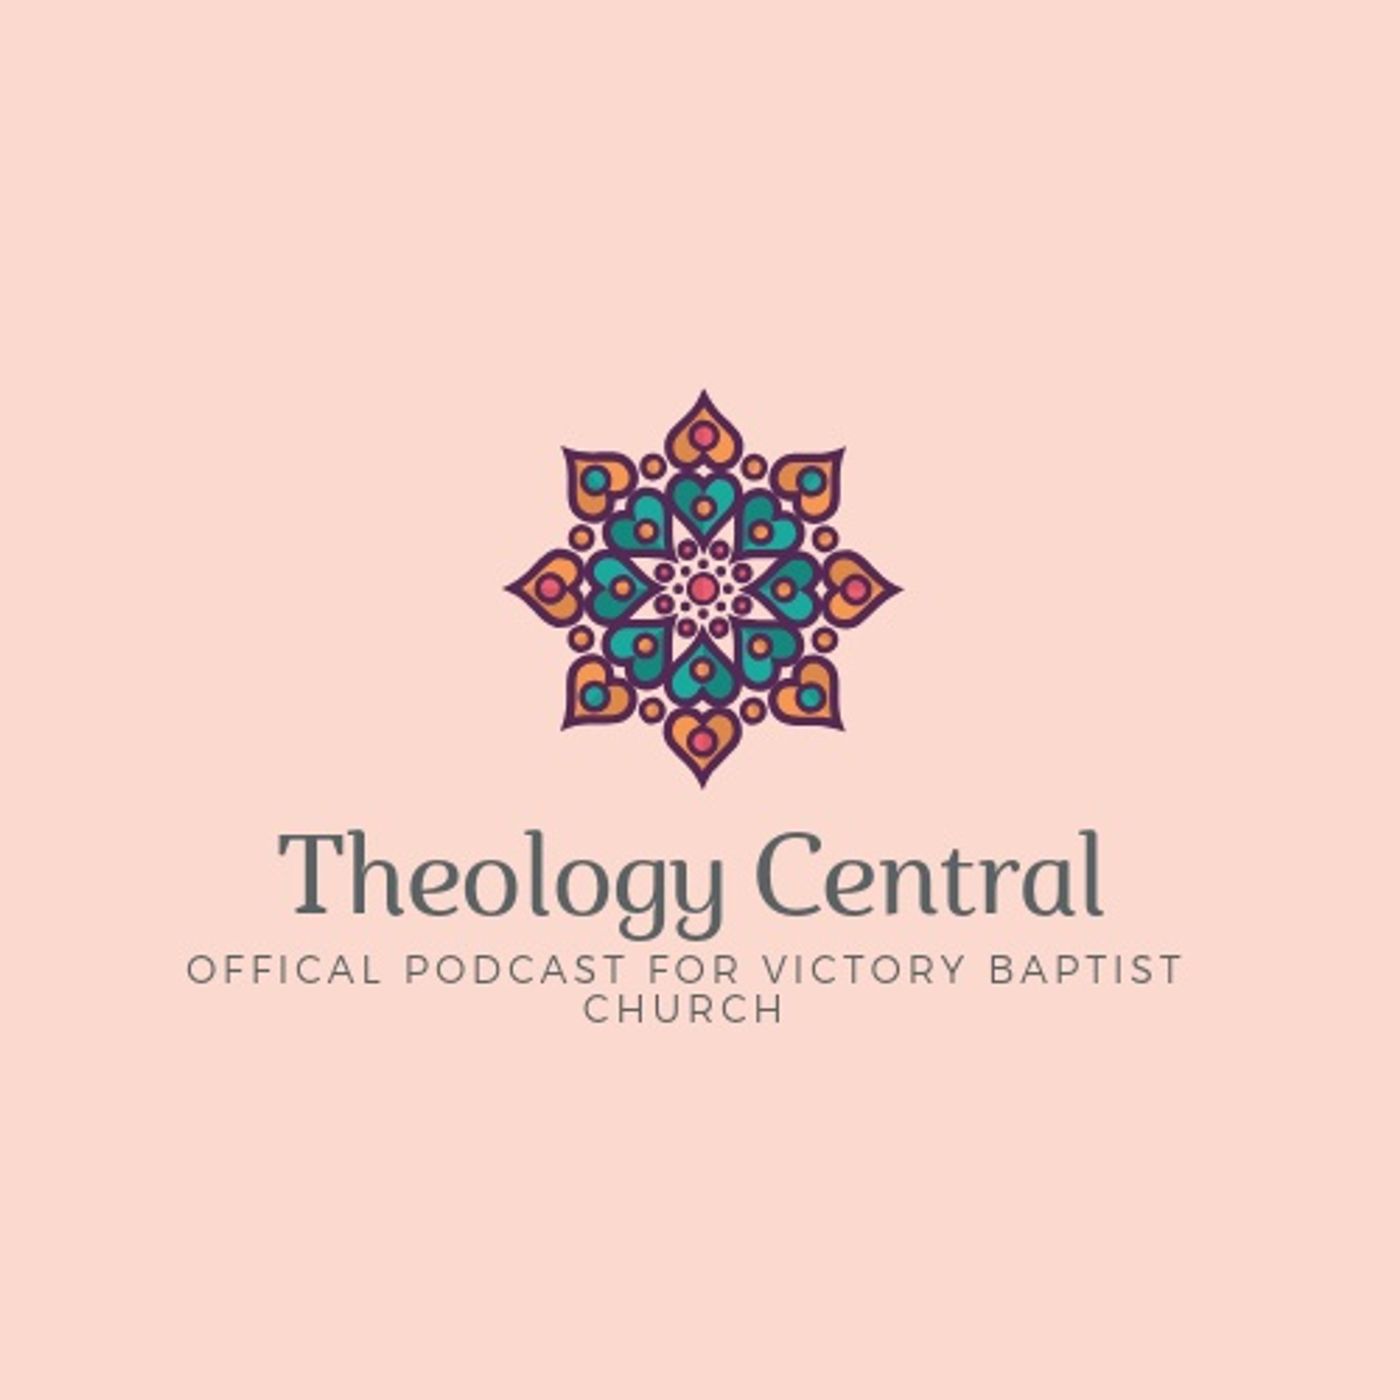 Identify the Theology